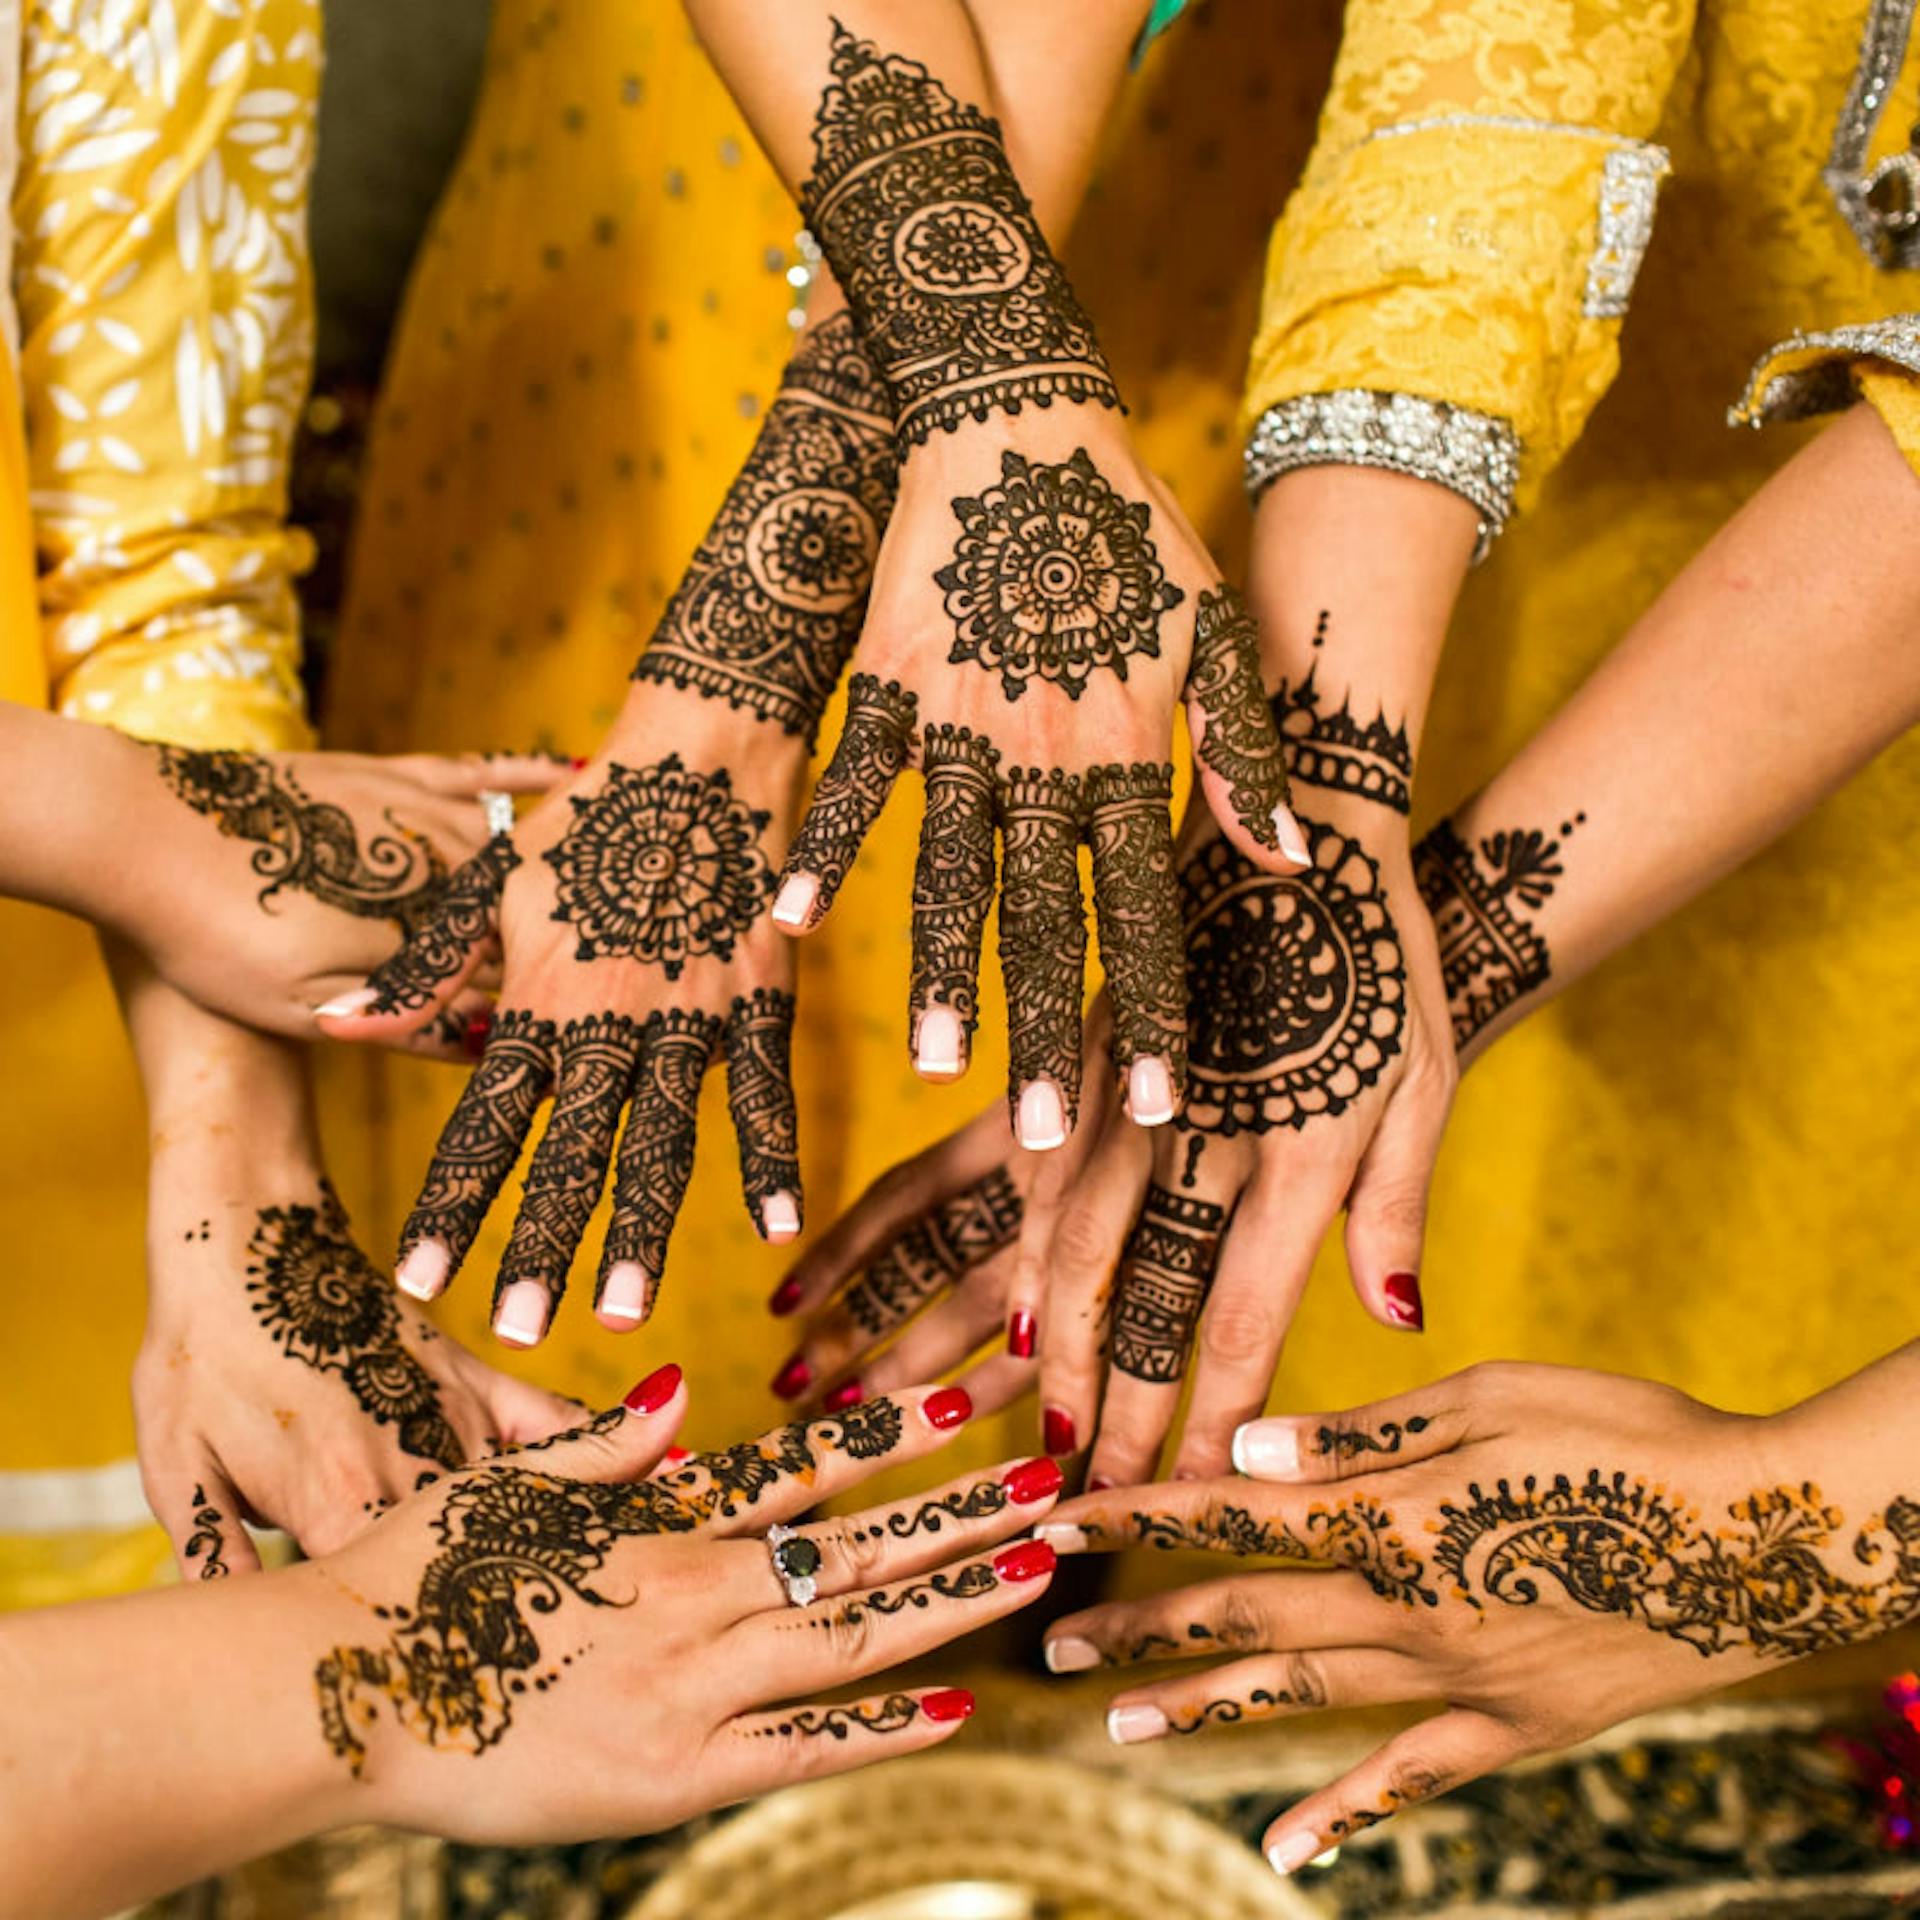 The traditional Mehndi ceremony is just one of many that make up a Desi wedding.